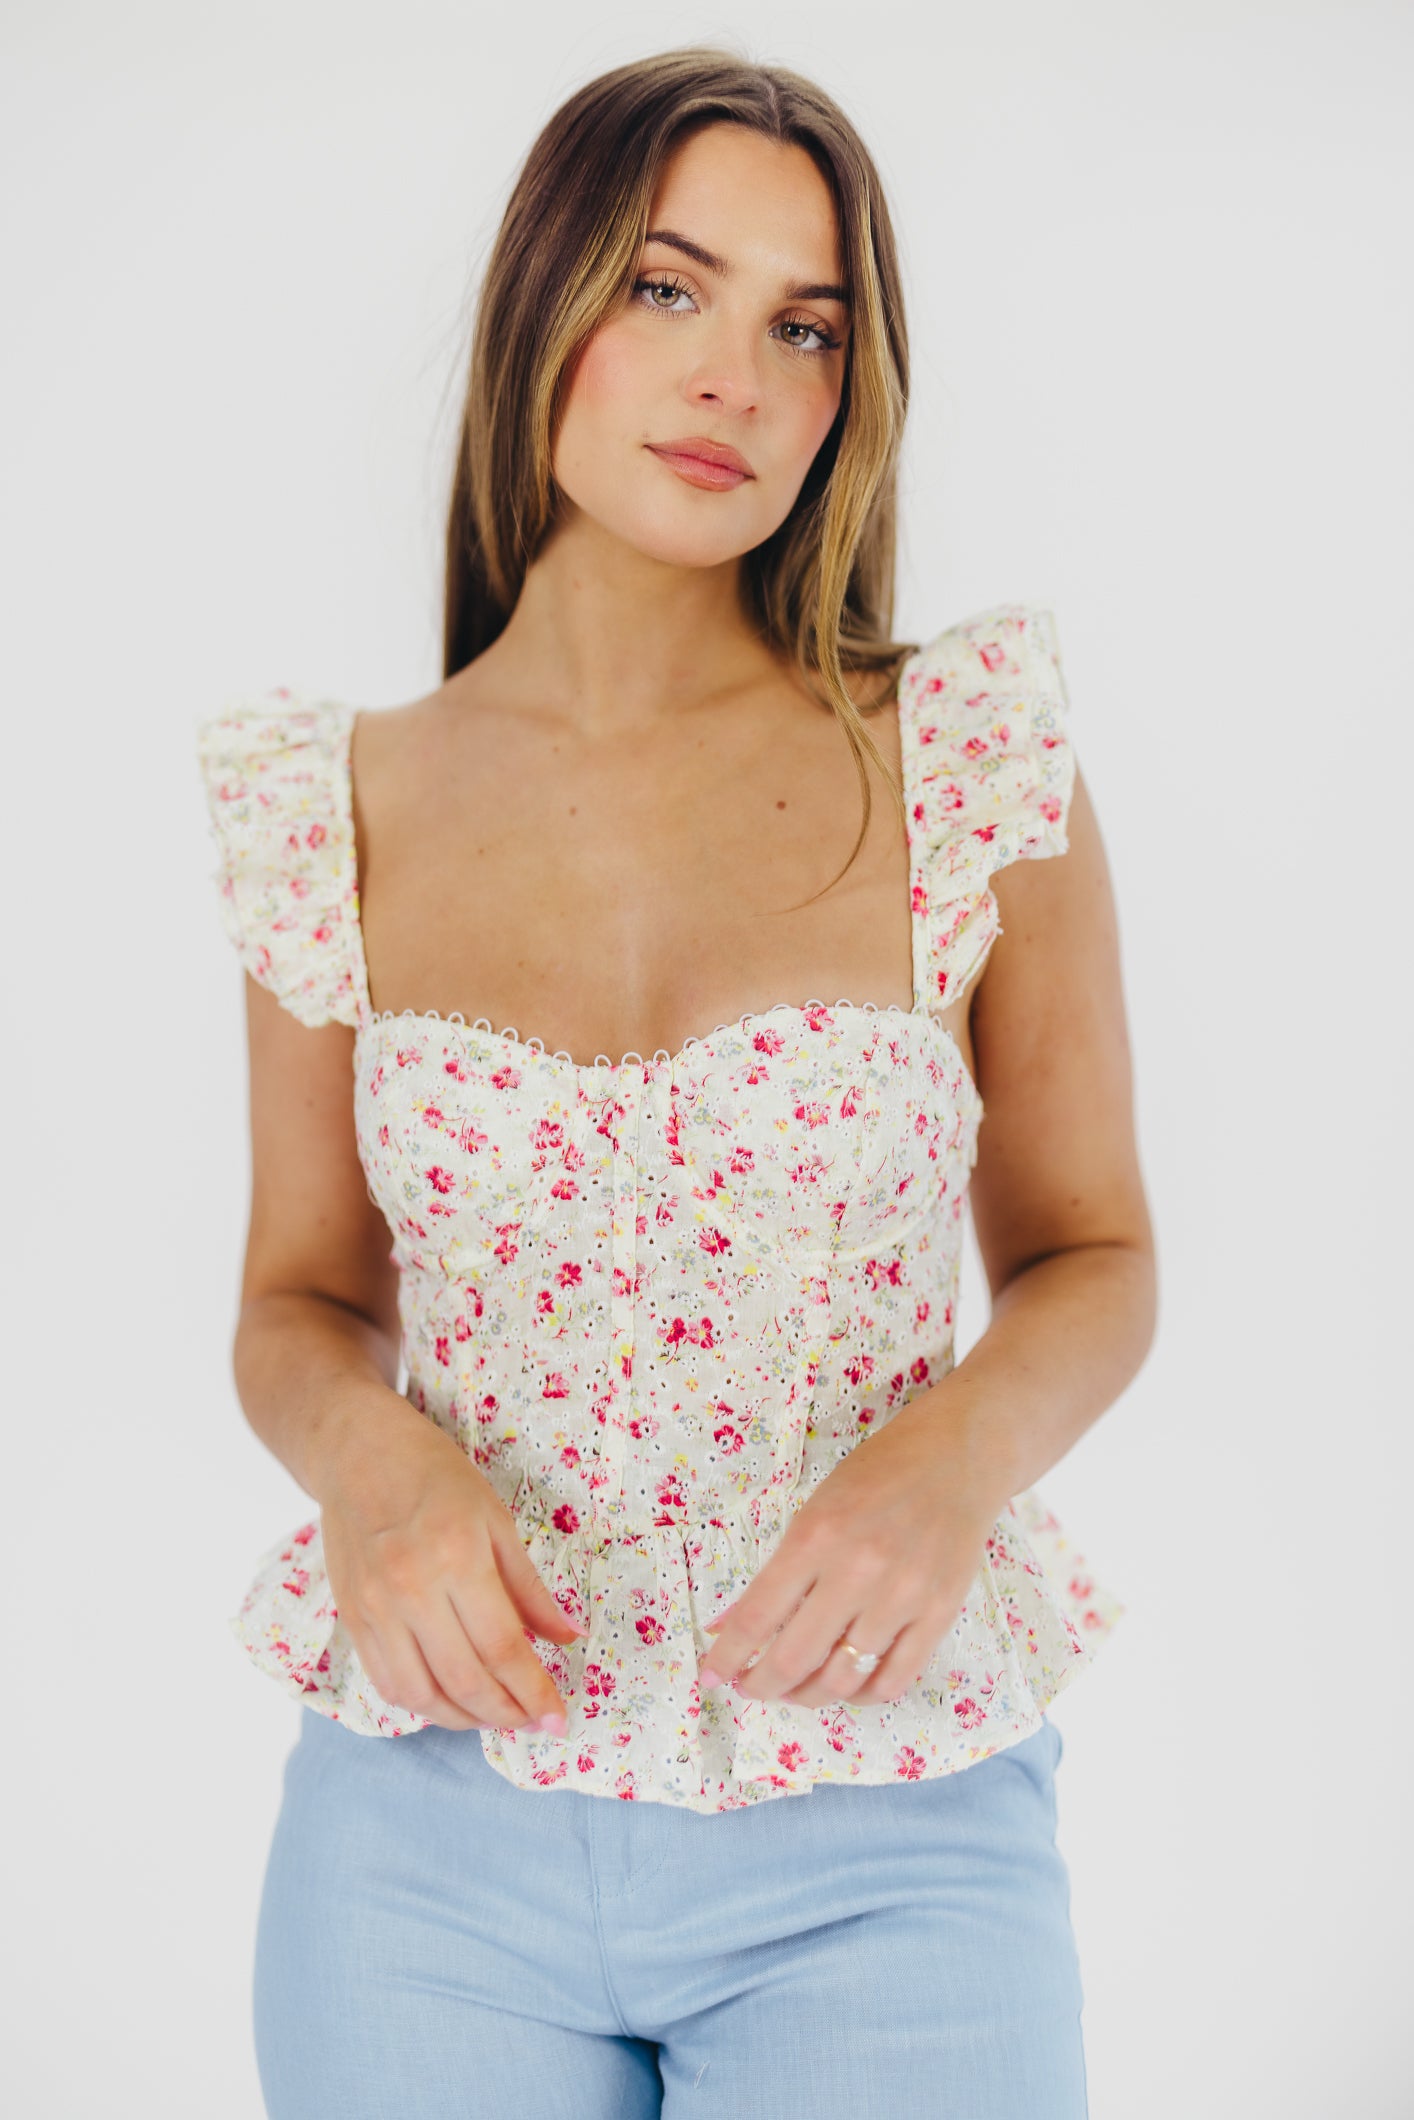 Baylin Peplum Top in White/Red Floral